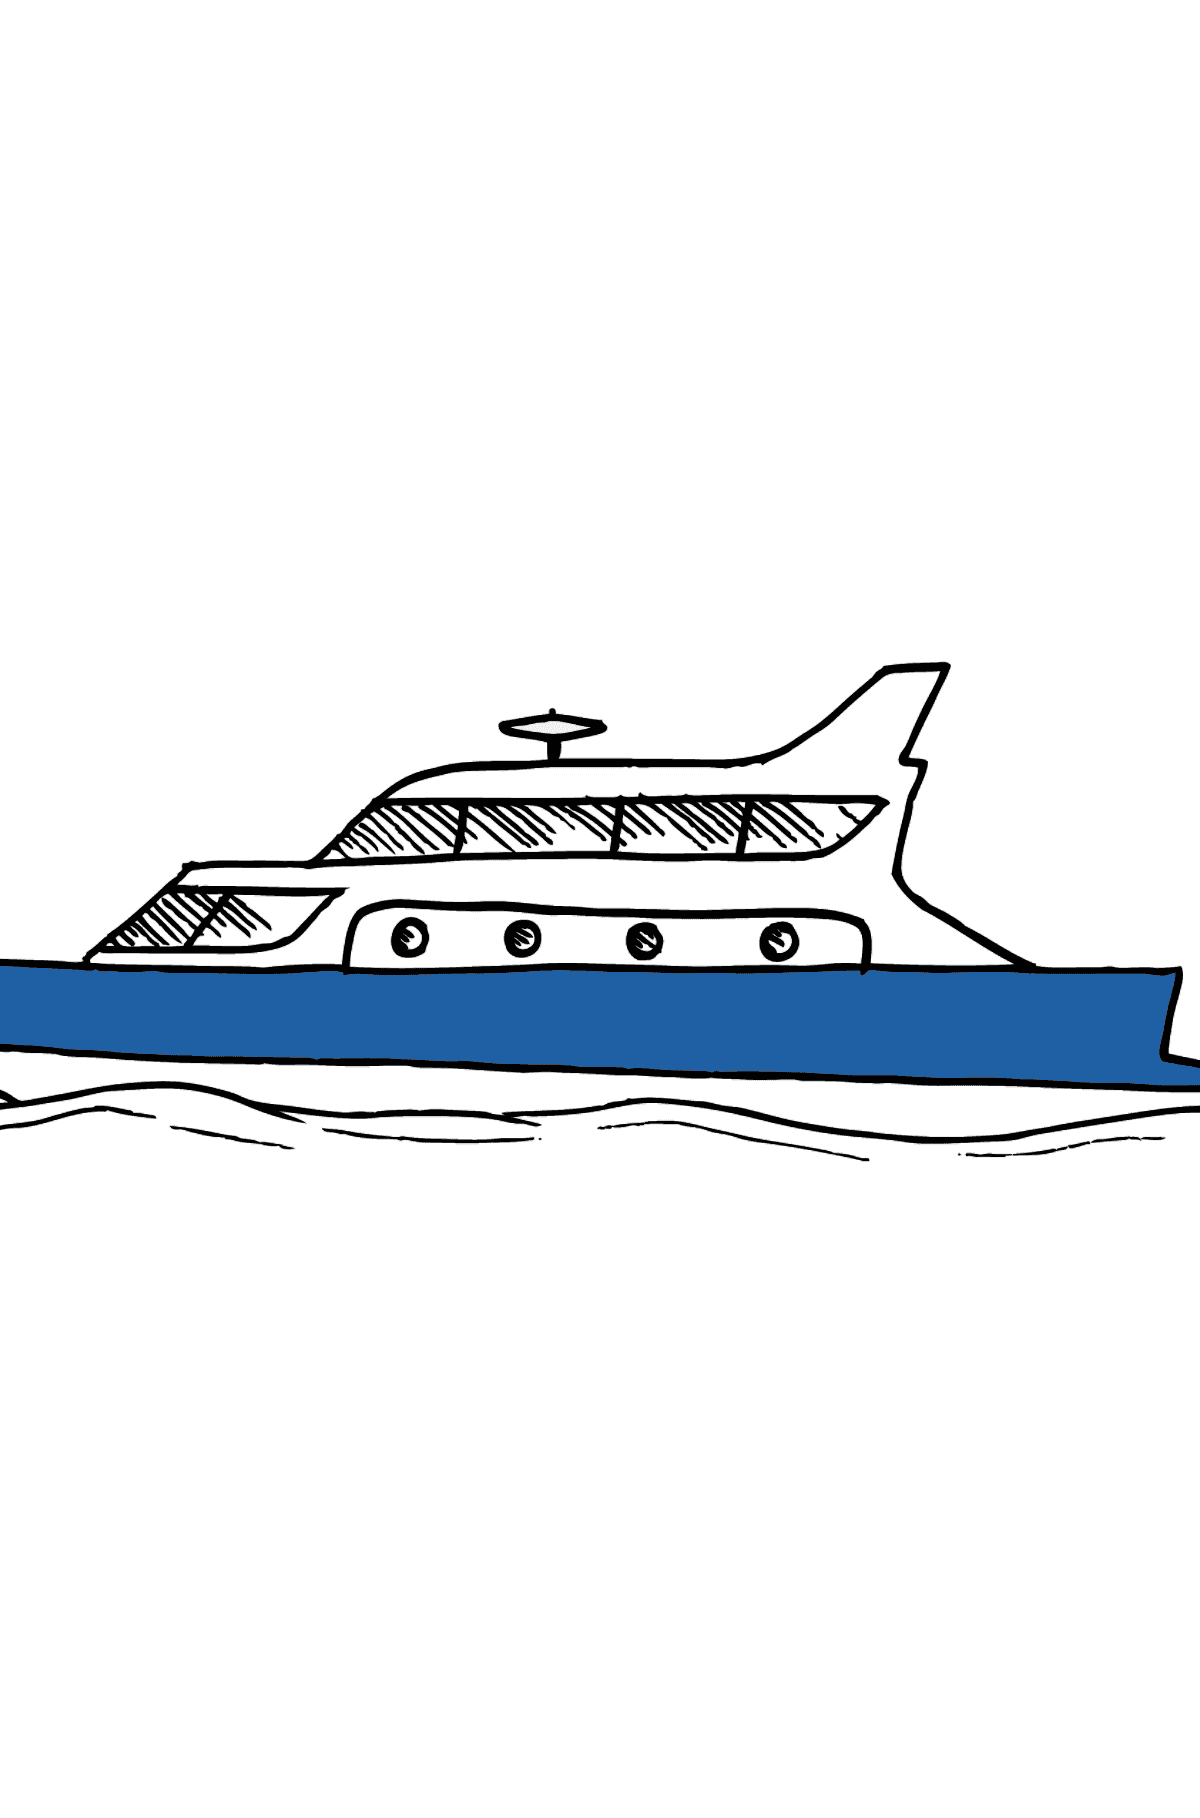 Coloring Page - A Yacht - Coloring Pages for Kids